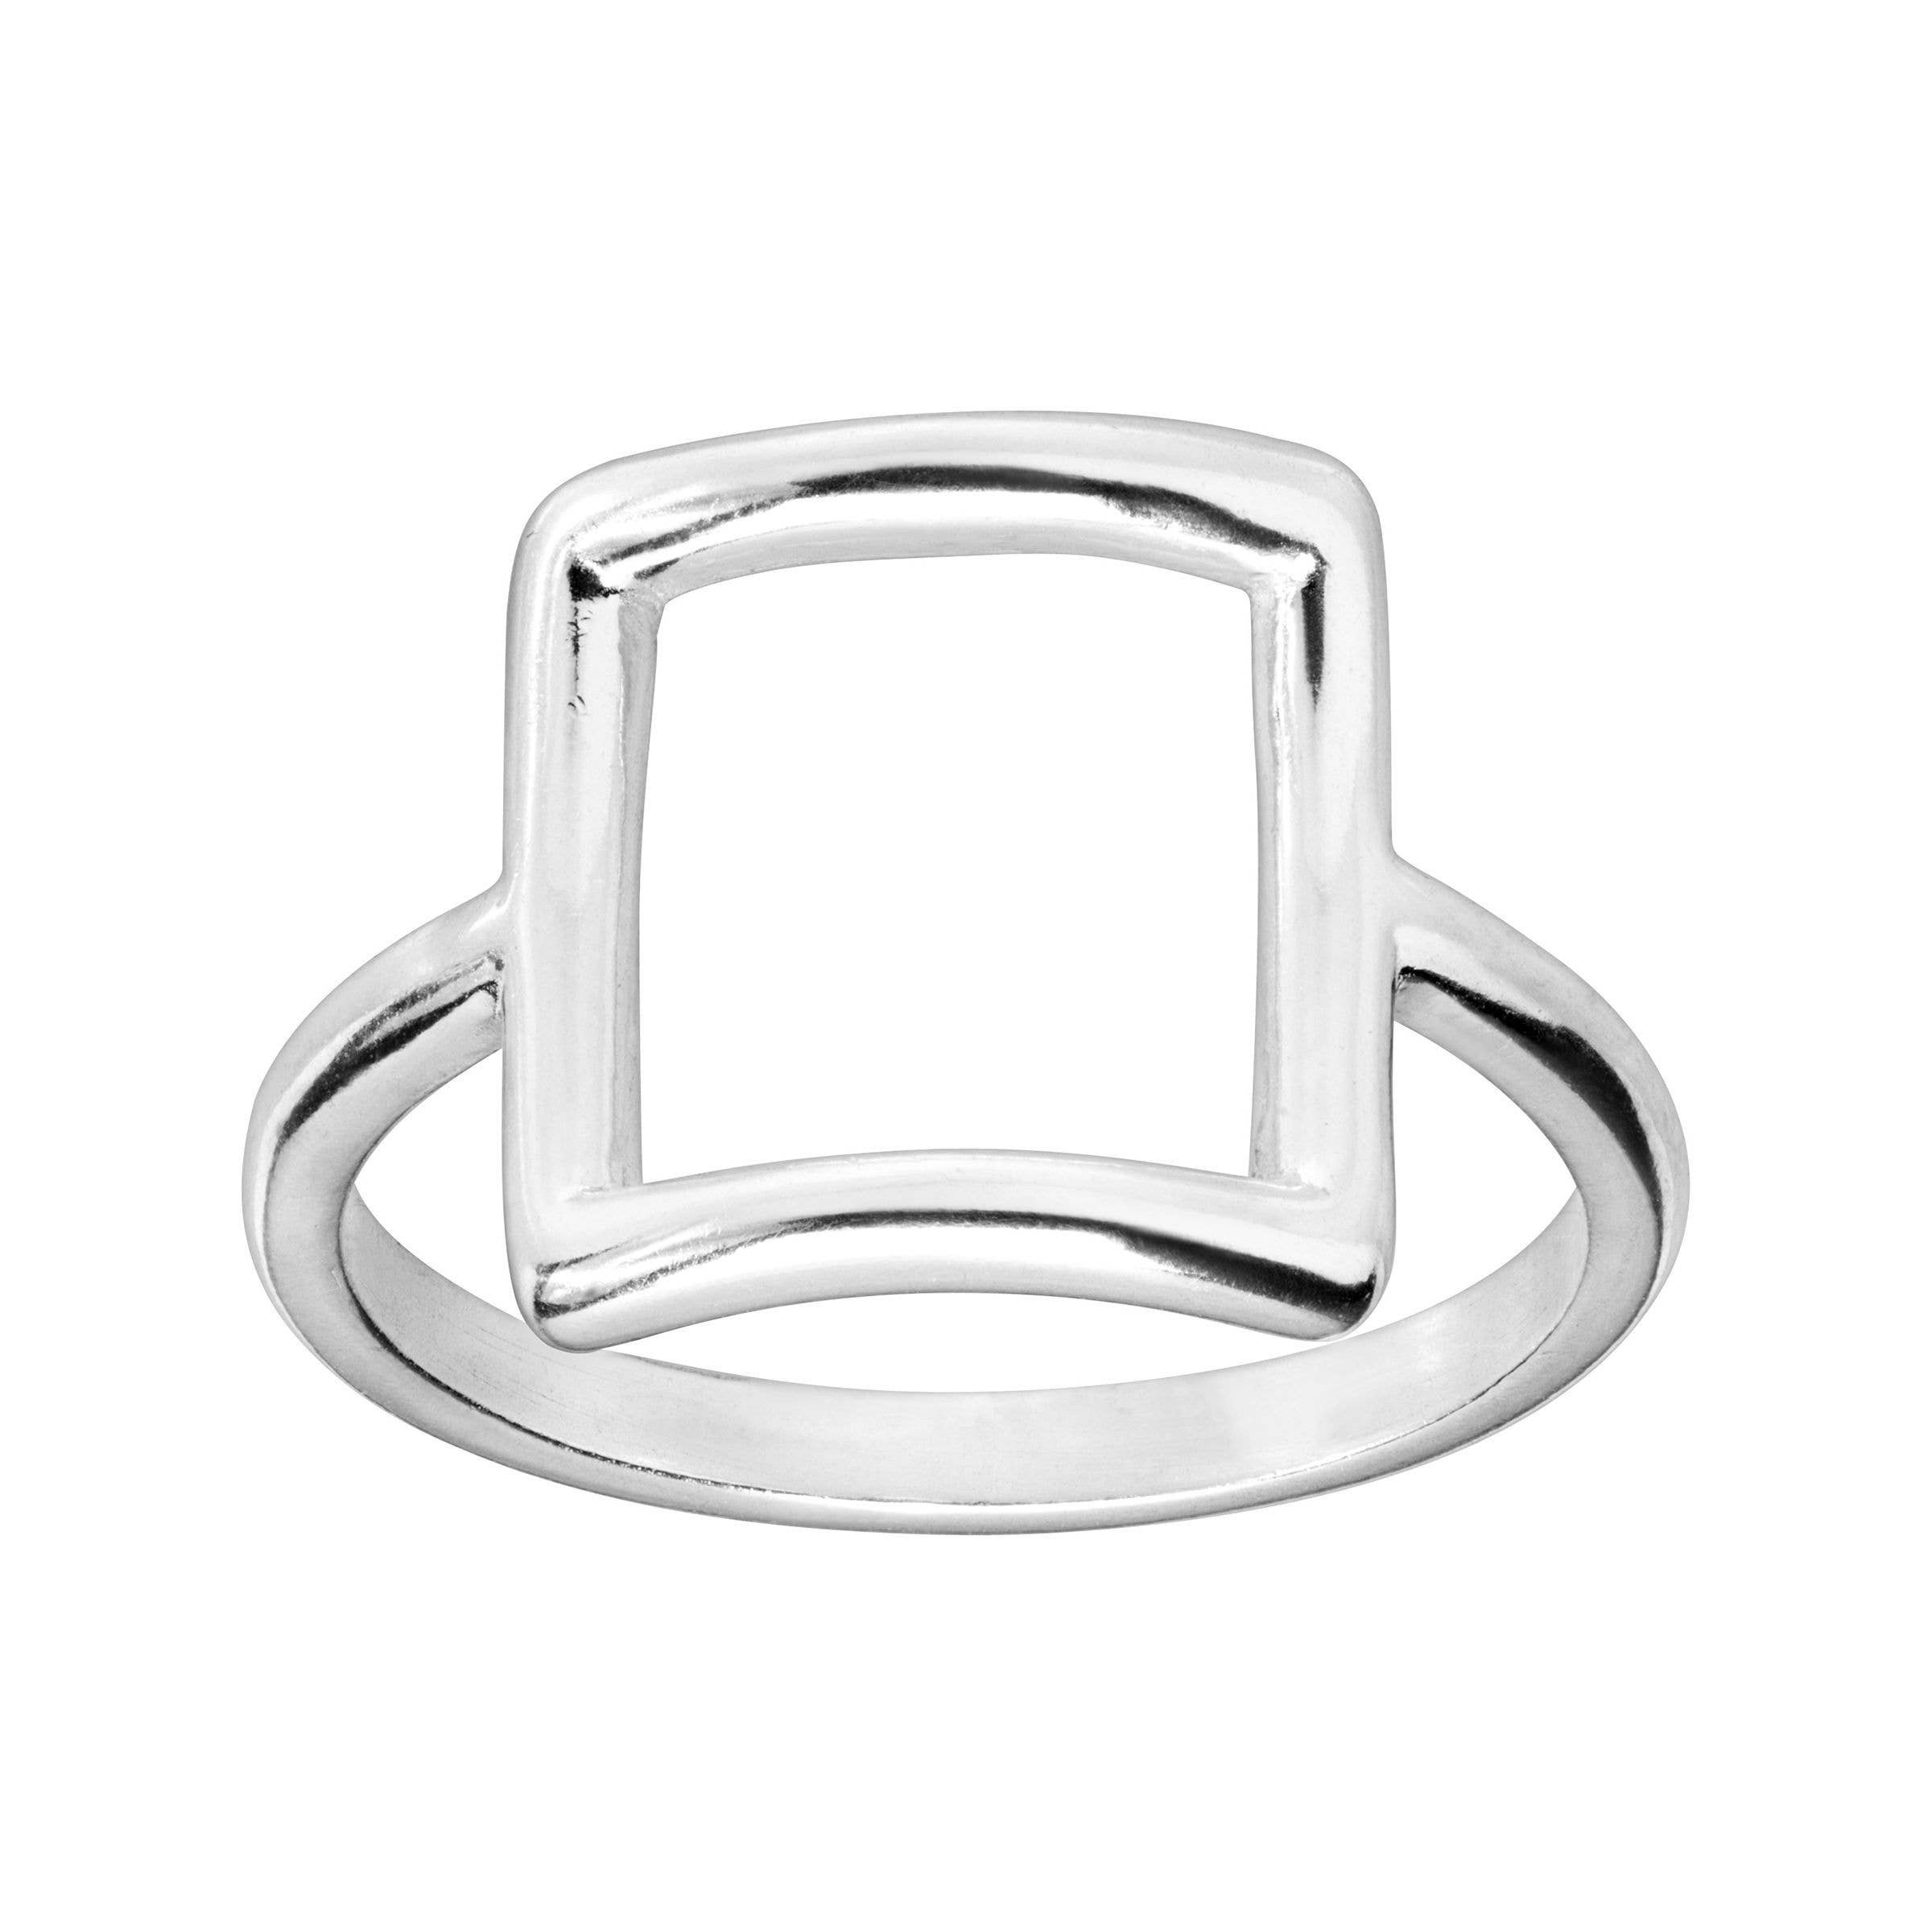 Whole 925 Sterling Silver Plated Fashion Net Ring Silpada Jewelry